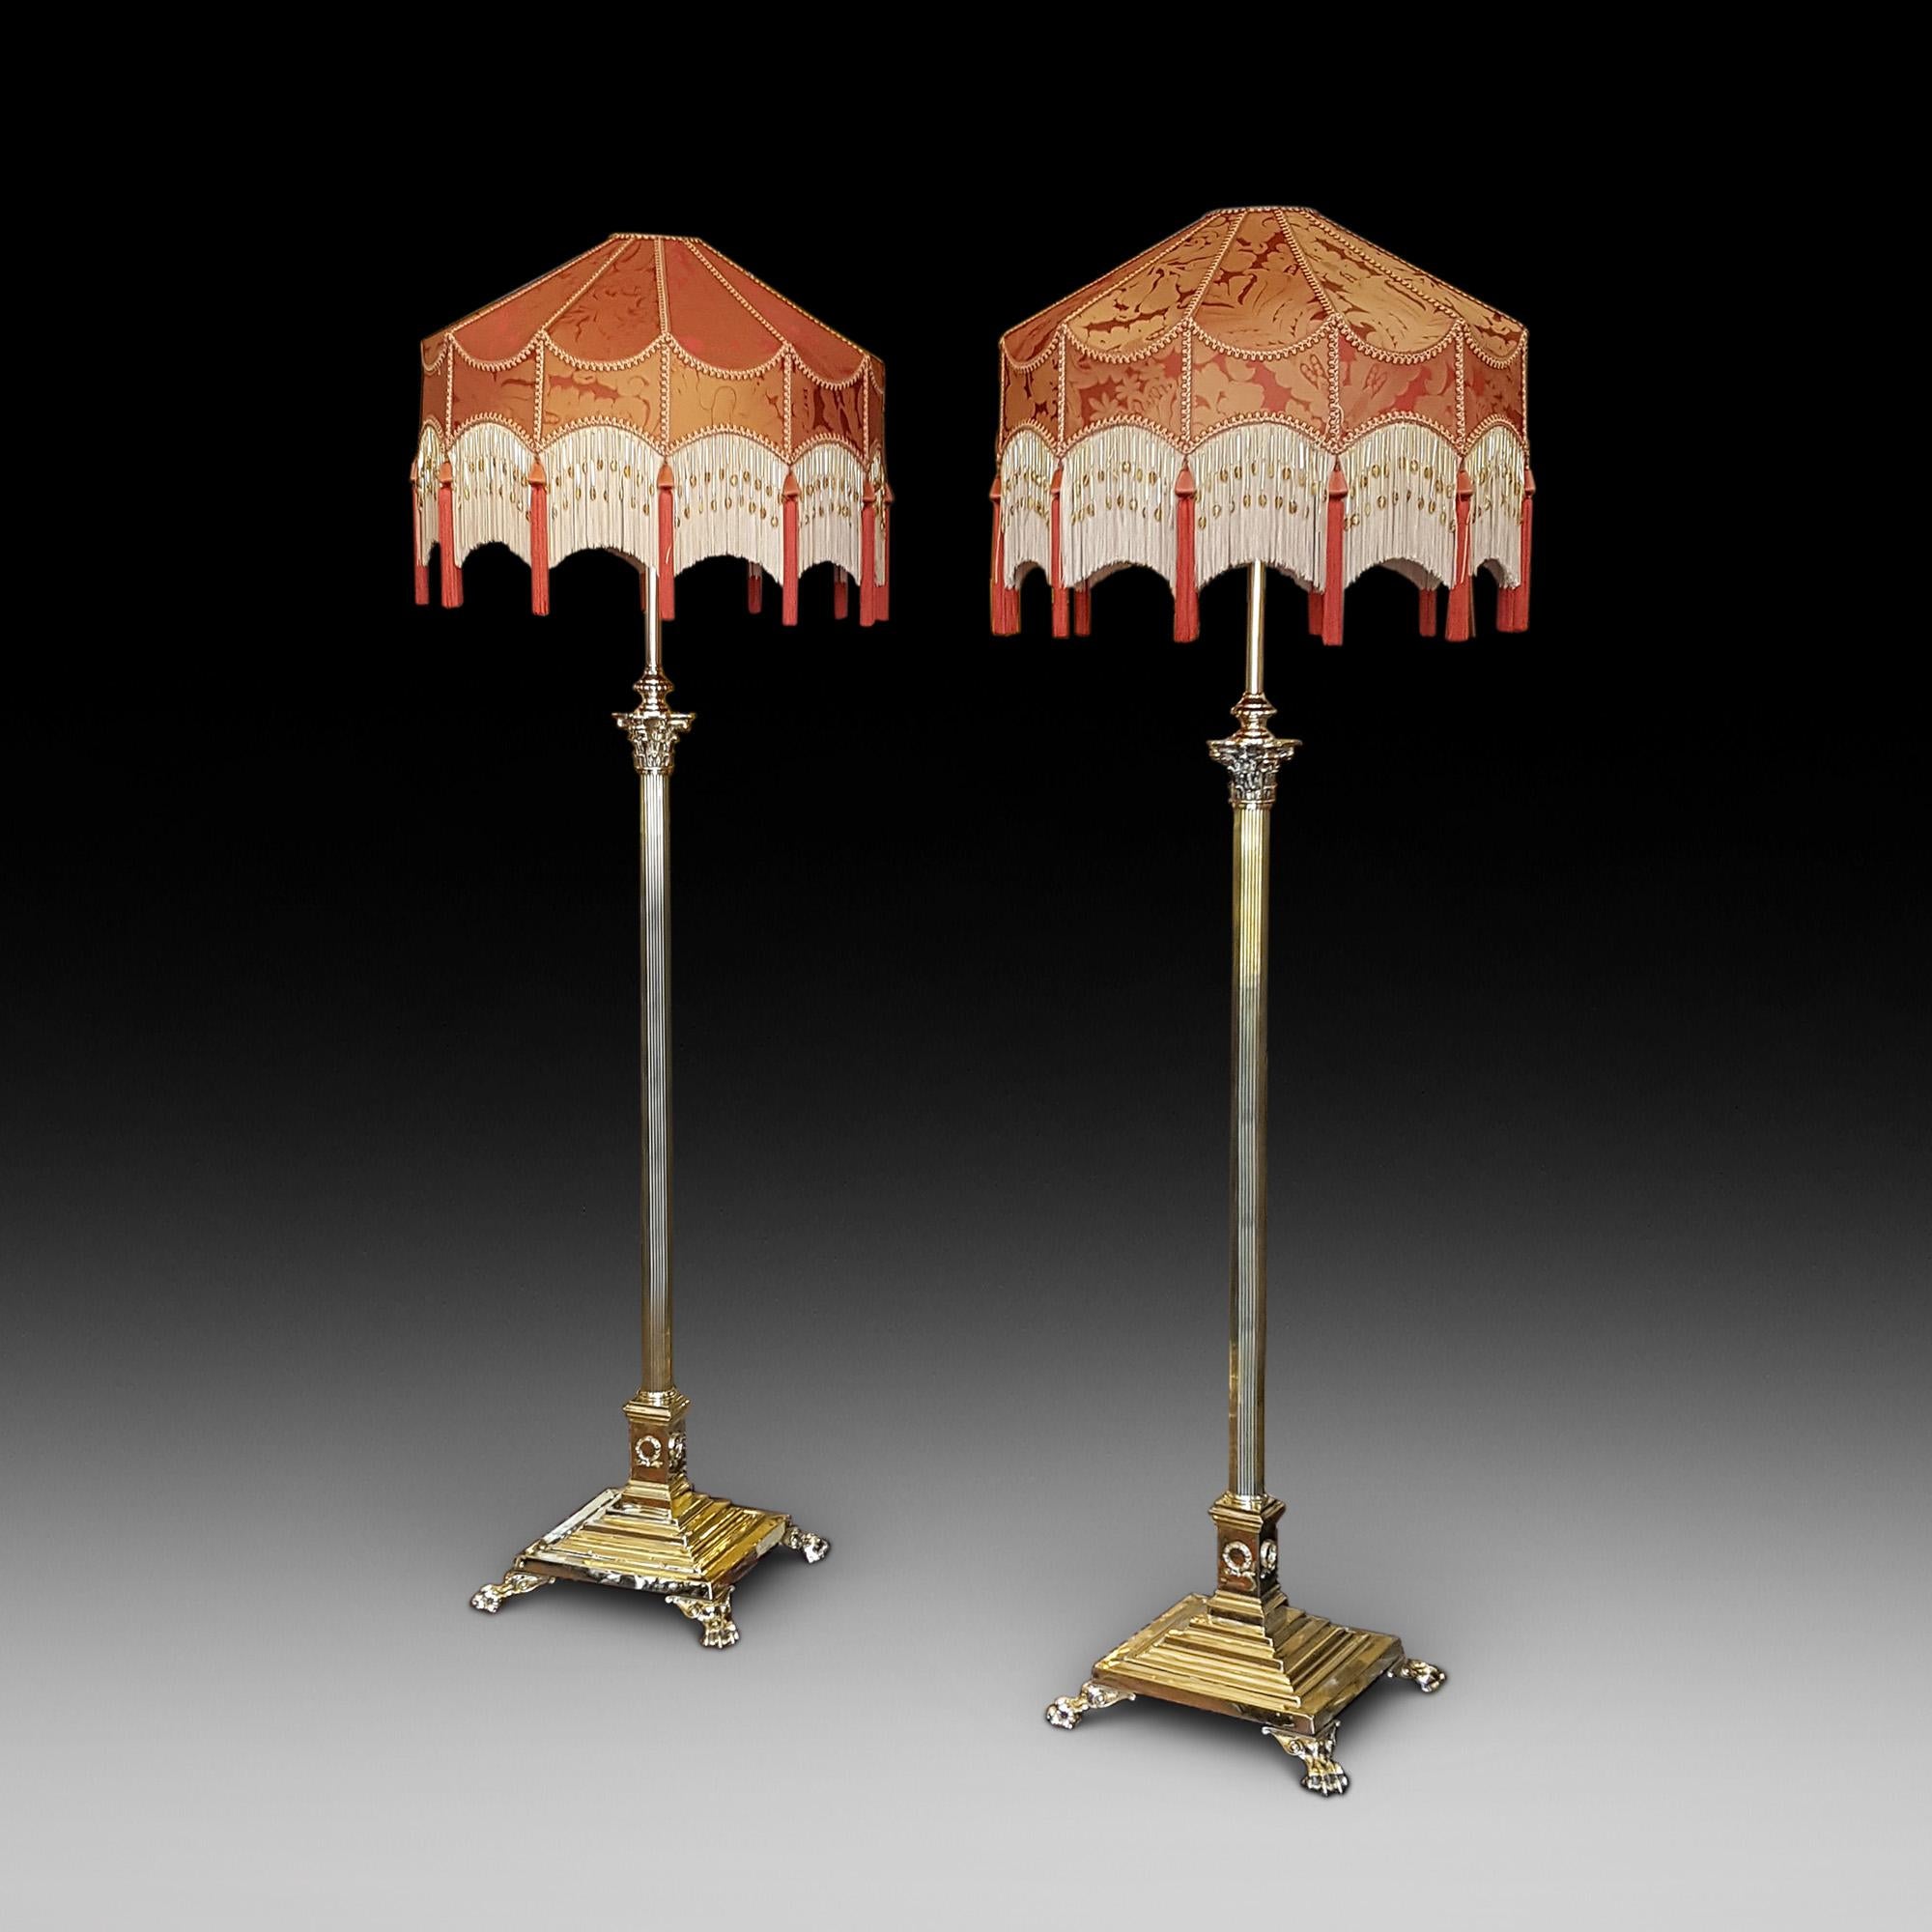 Pair of early 20th century neoclassical brass telescopic standard lamps, in the form of a Corinthian column, on platform base decorated with laurel wreaths with paw feet - The lampshade(s) are newly handmade silks by the same maker as provides the